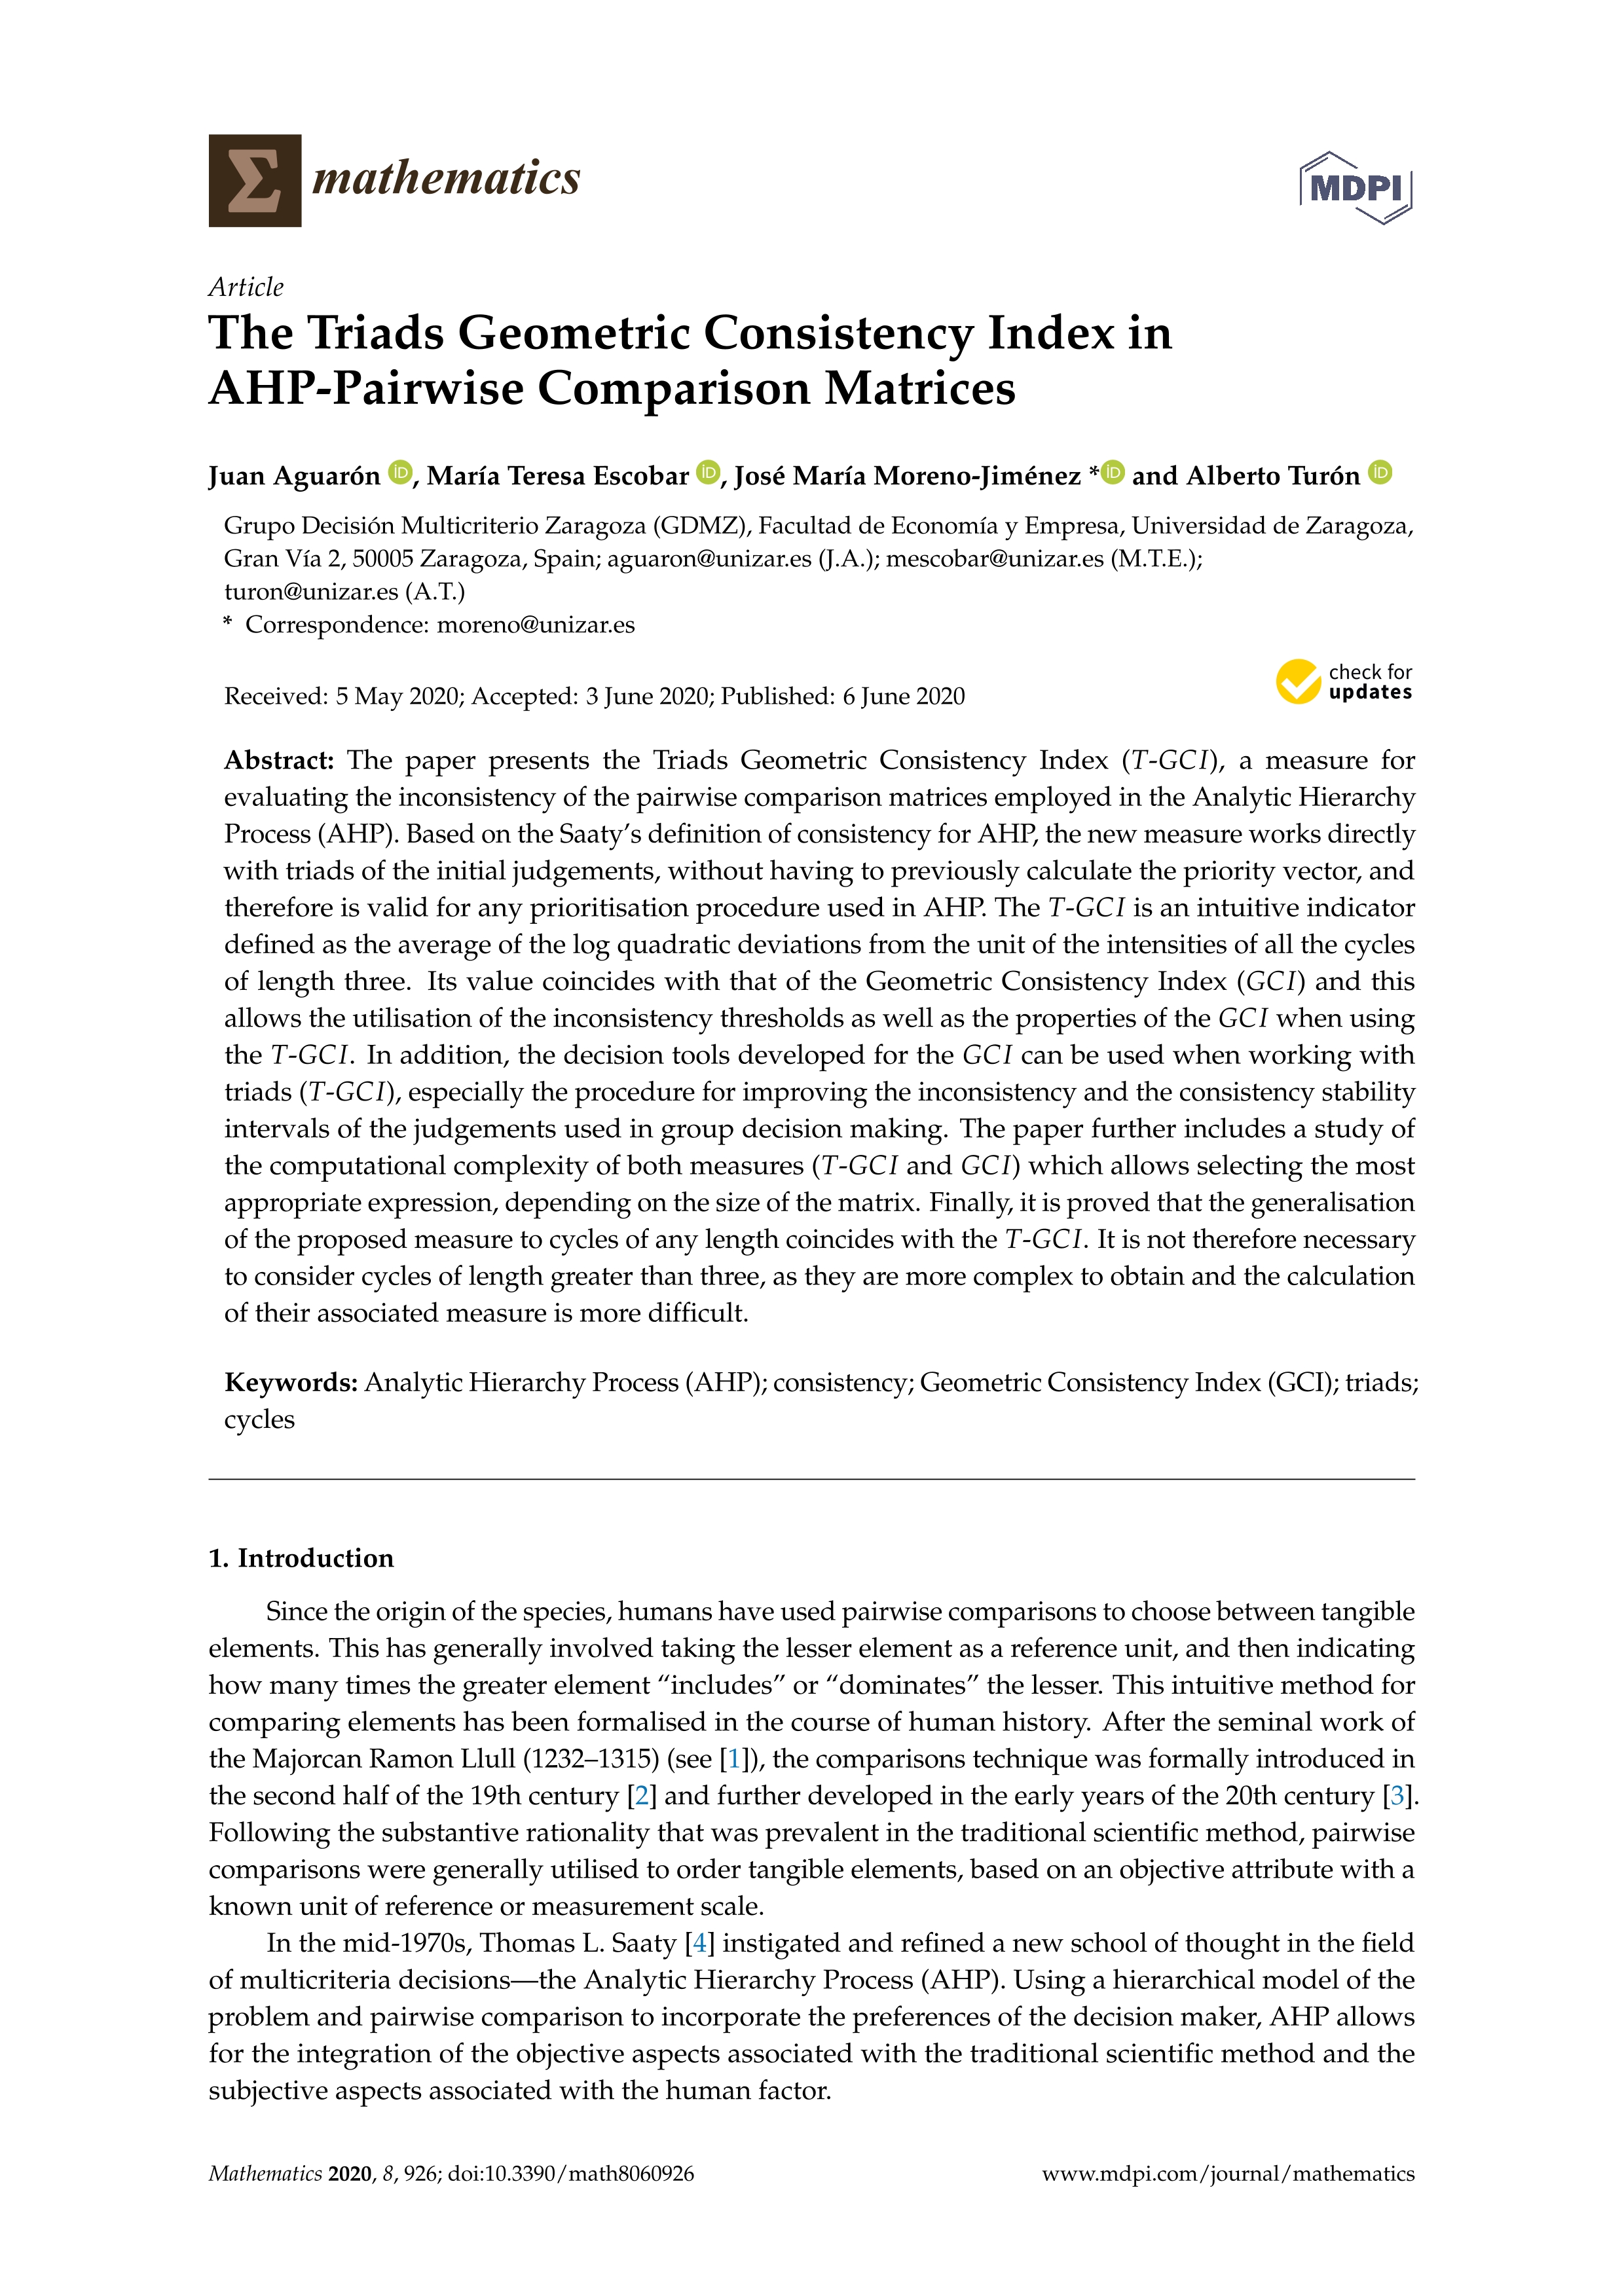 The Triads Geometric Consistency Index in AHP-Pairwise Comparison Matrices